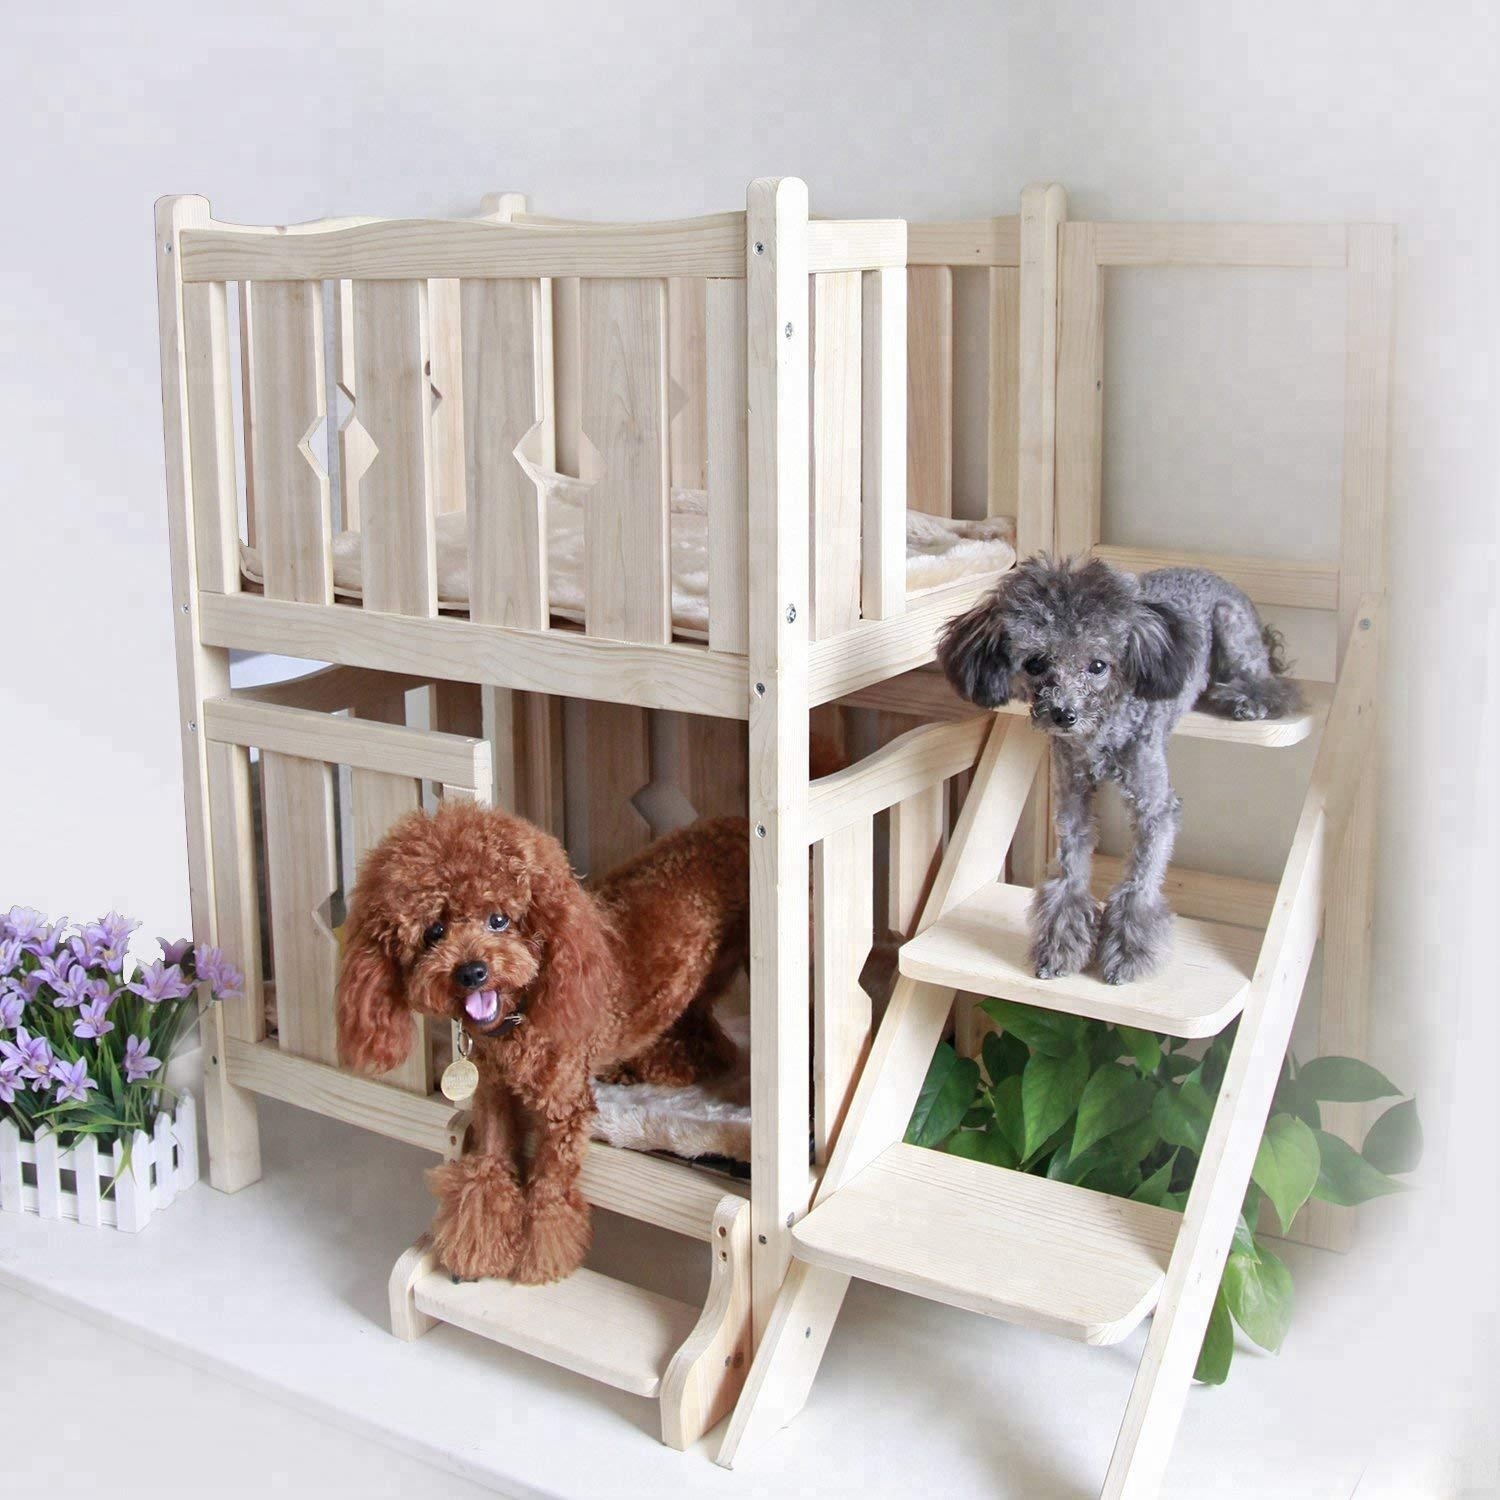 Ladder bed 2 +80 Adorable Dog Bed Designs That Will Surprise You - 33